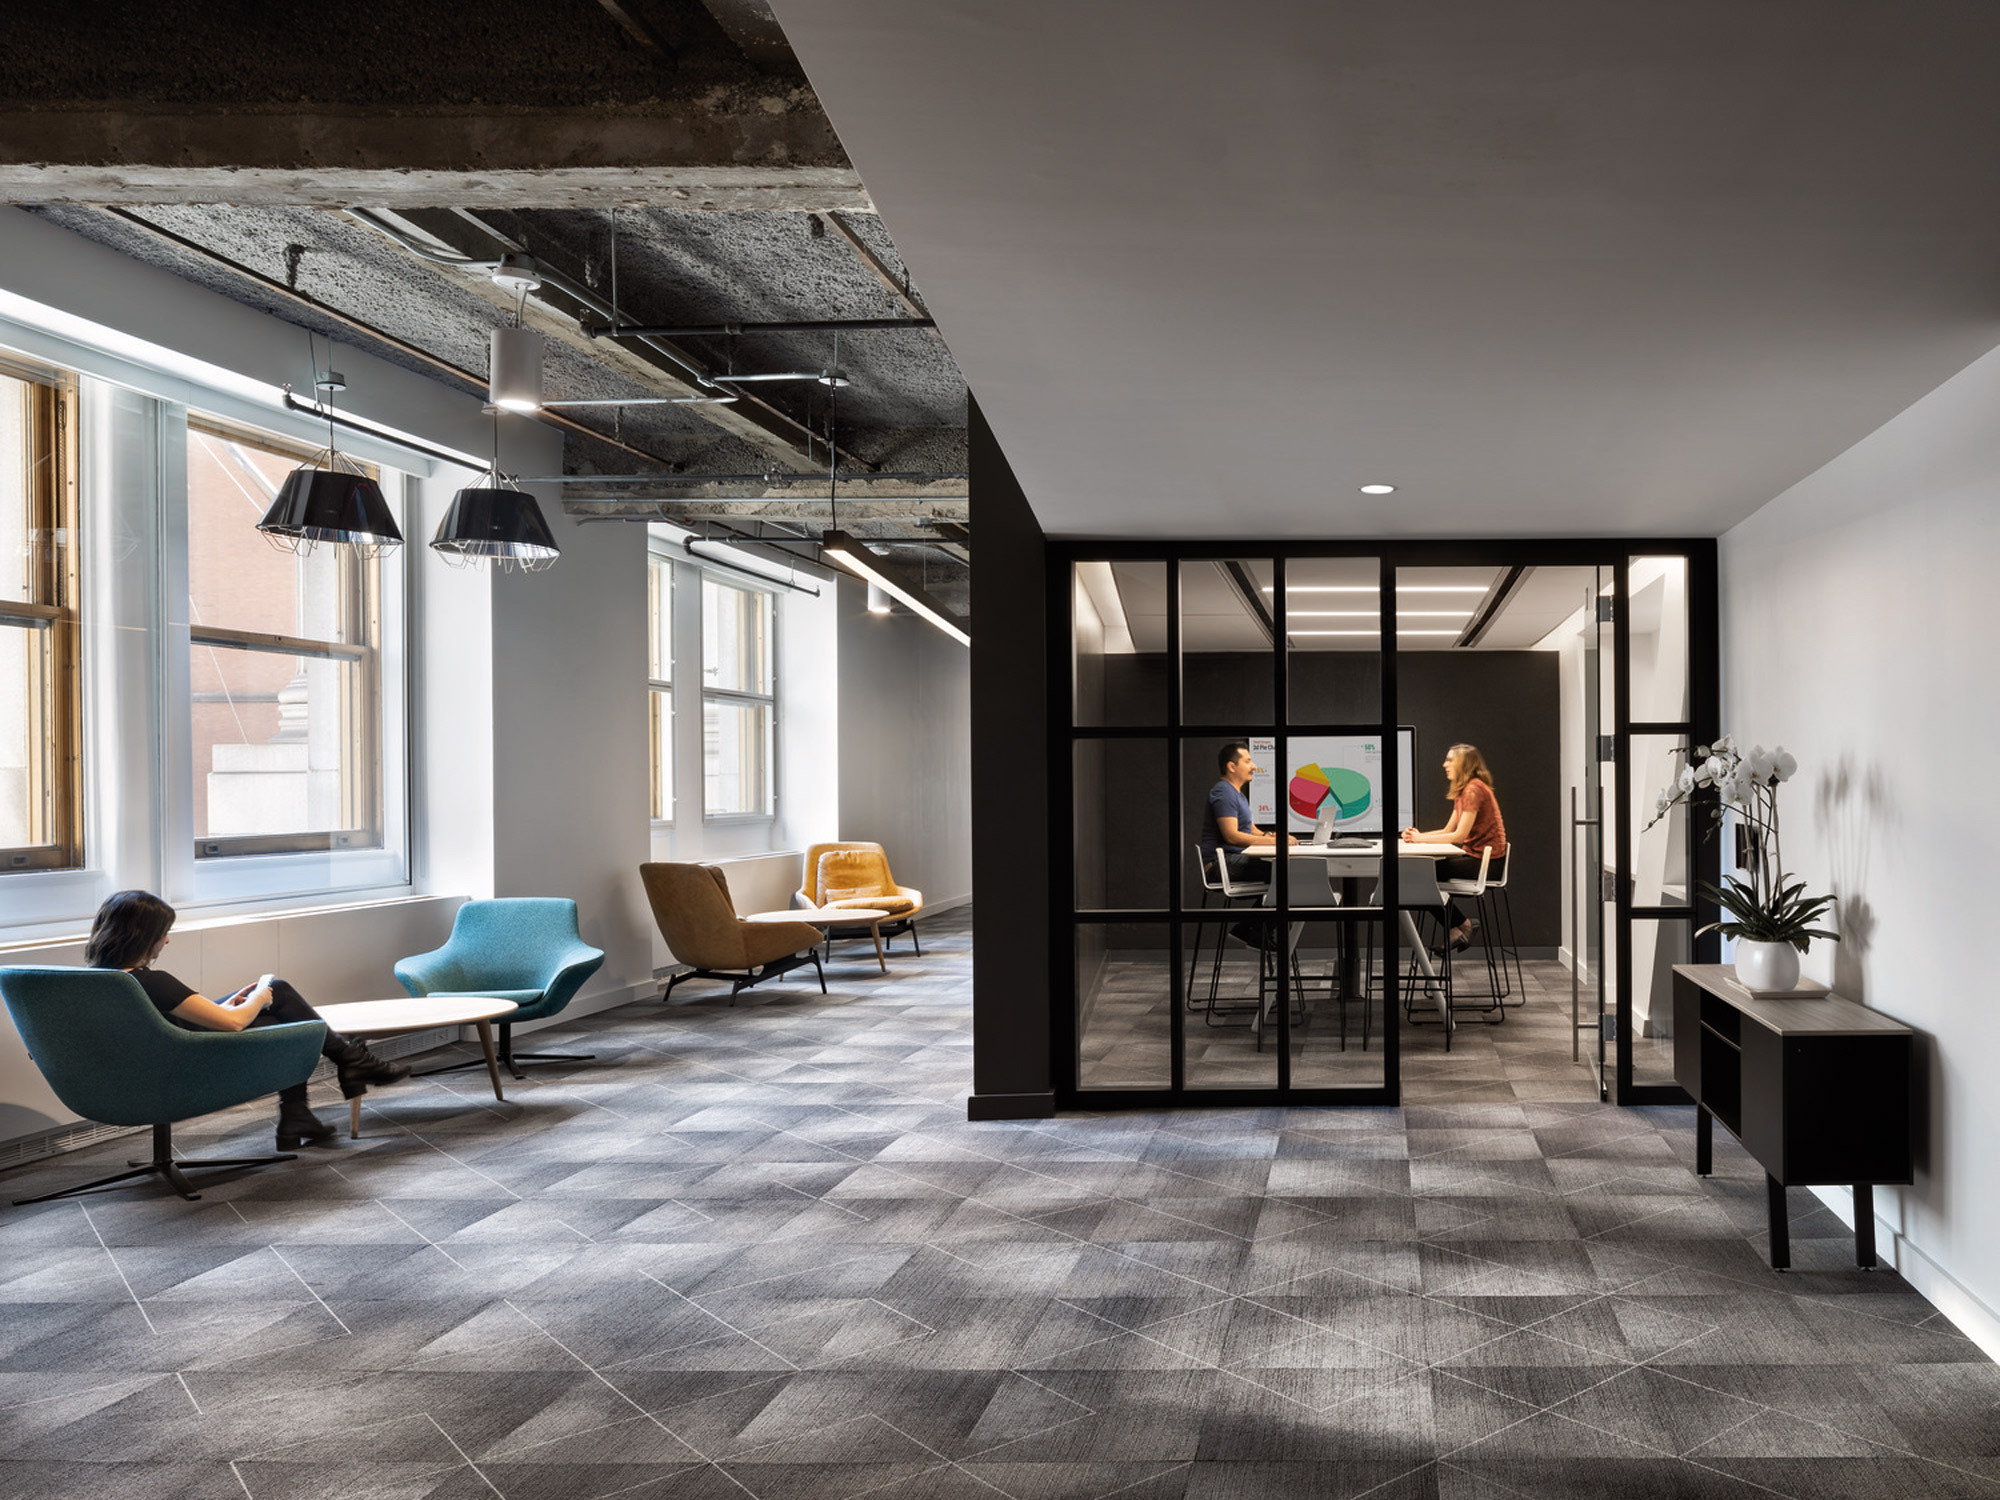 Spacious modern office lobby featuring geometric patterned carpet, cozy seating areas with colorful mid-century chairs, a sleek black-framed glass meeting room, and industrial-style exposed ceiling beams. Natural light streams in through large windows, complementing the warm ambient lighting.